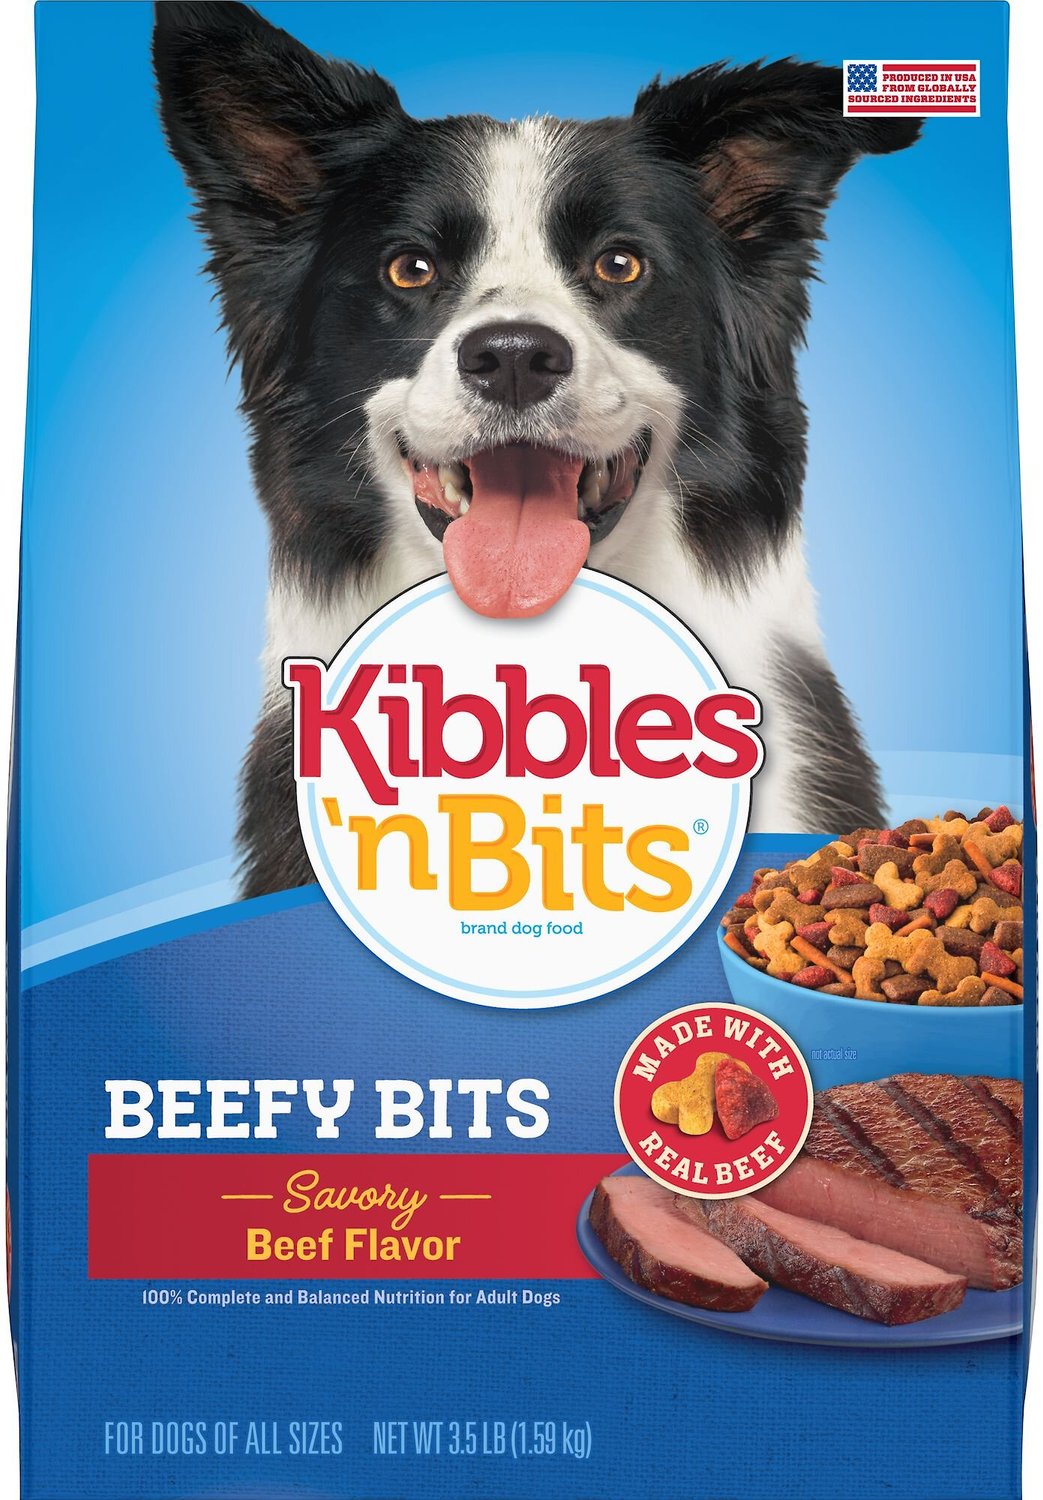 kibbles and bits and bits and bits